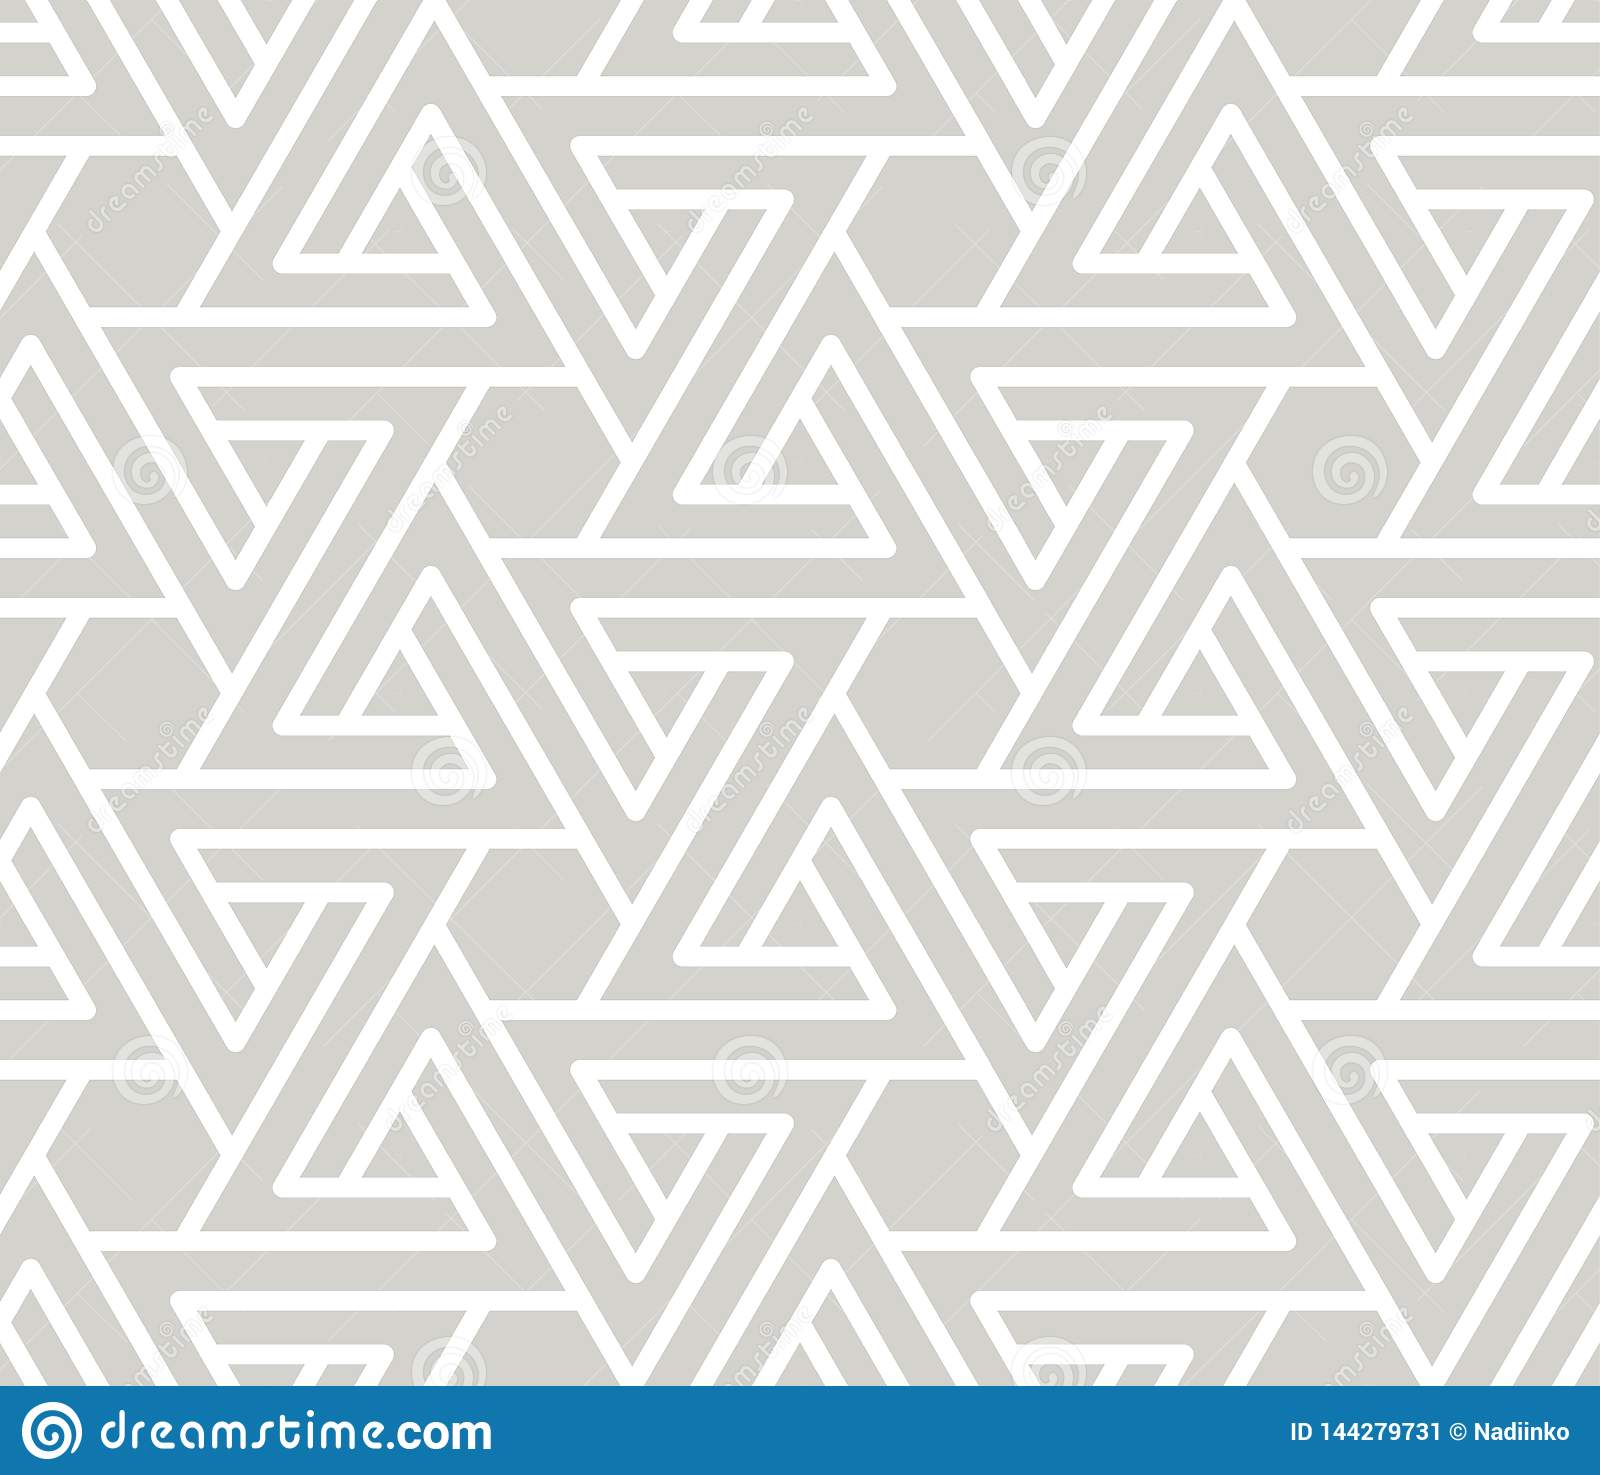 Abstract simple geometric vector seamless pattern with white line texture on grey background light gray modern stock vector